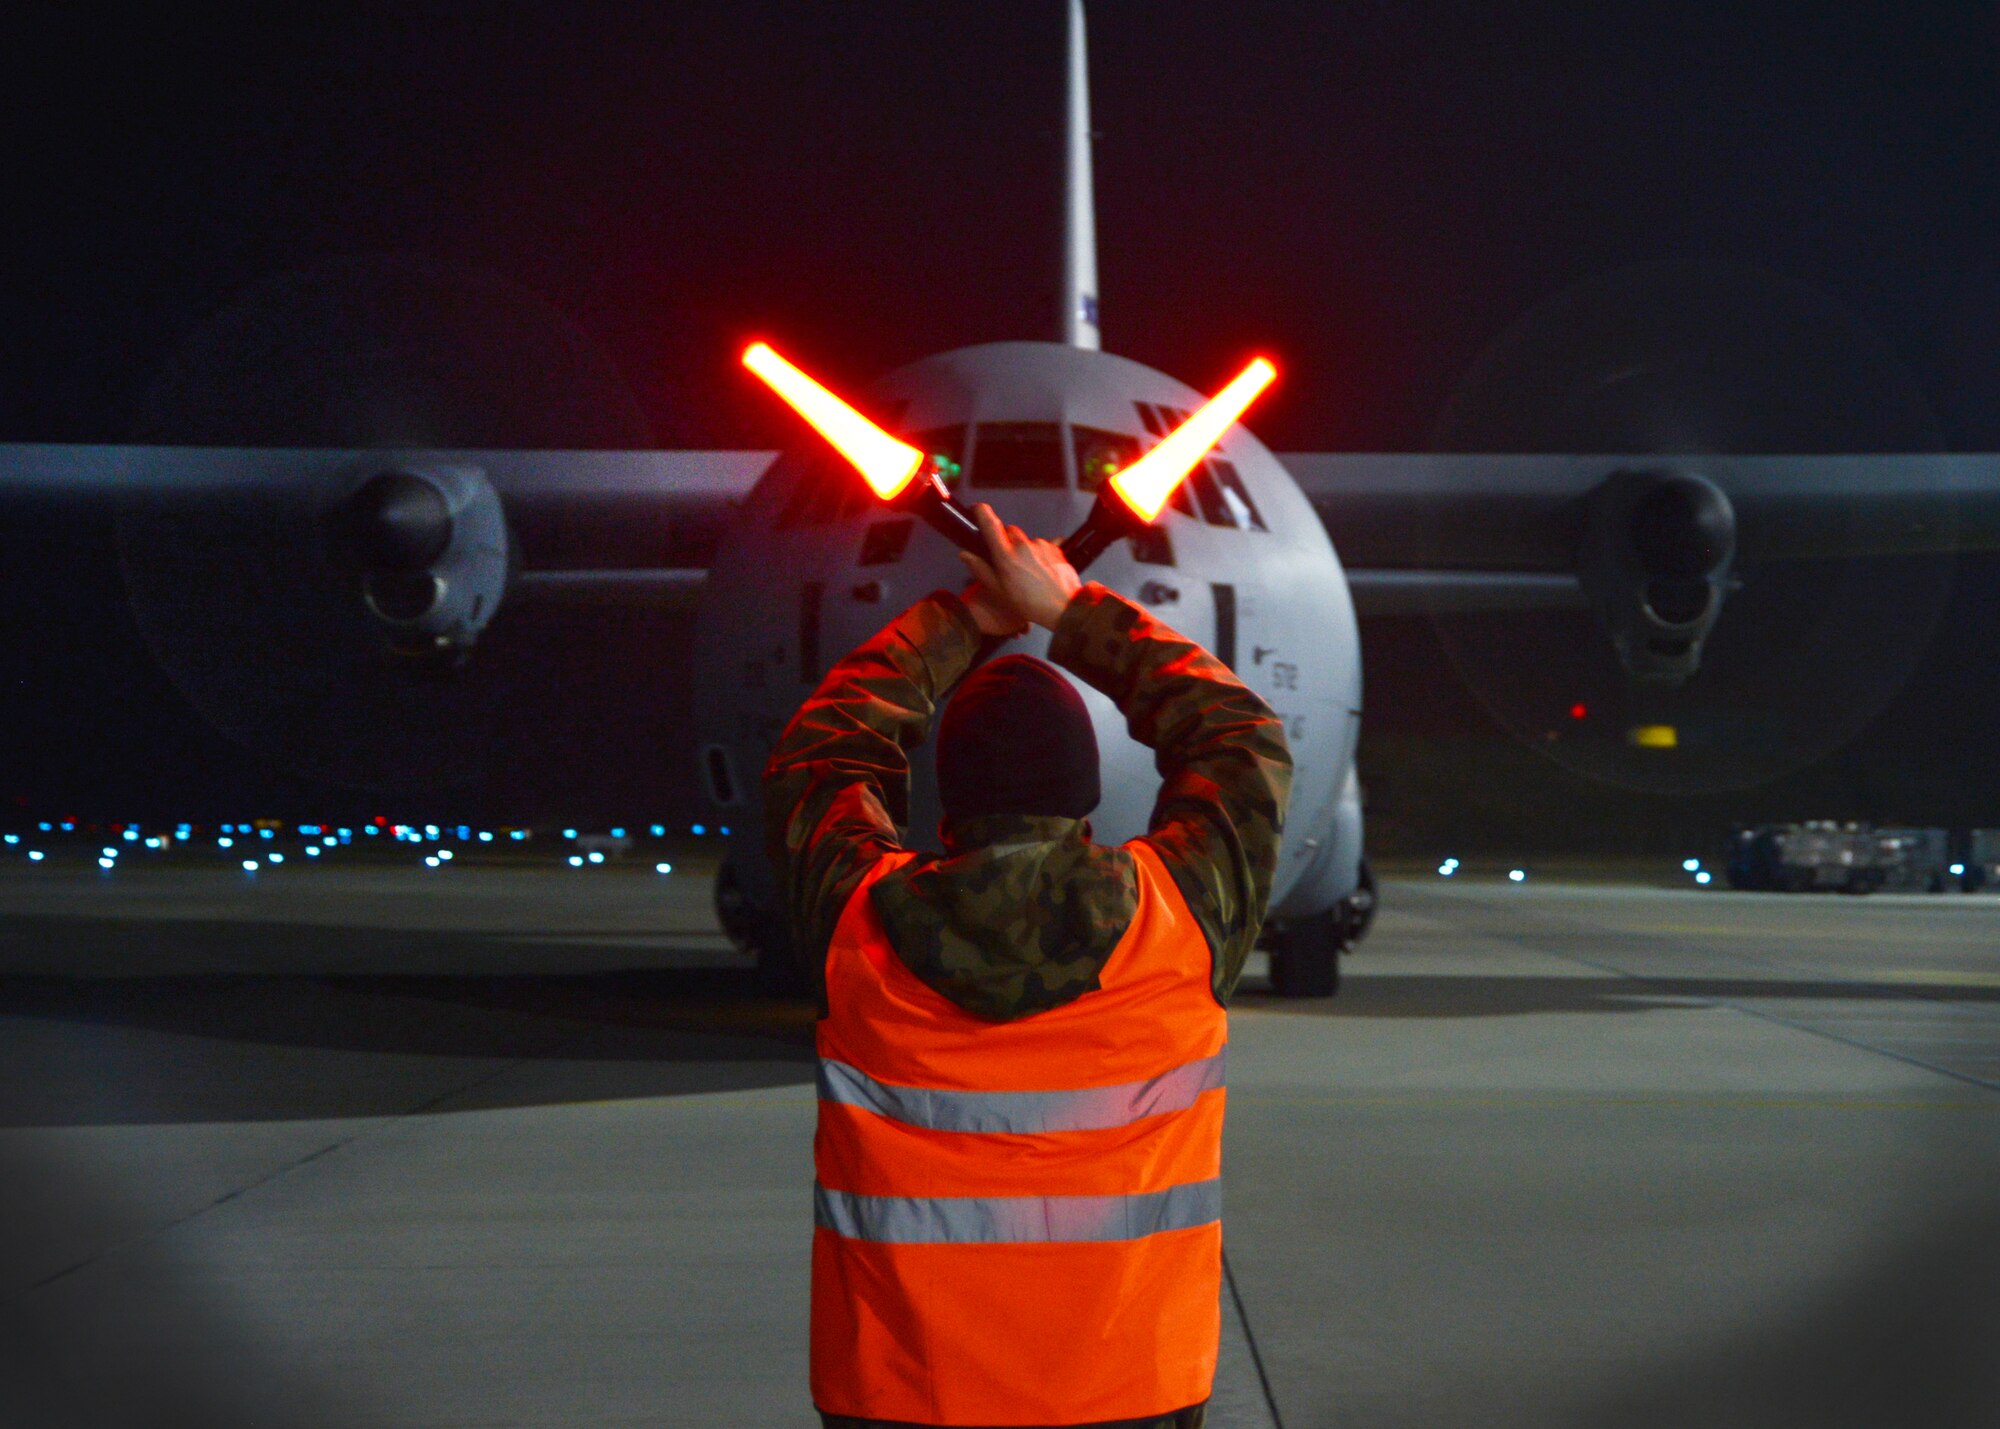 A Polish Airman guides a C-130 Hercules from Ramstein Air Base, Germany, onto the flightline at Lask Air Base, Poland, March 13, 2014. More than 240 U.S. service members arrived to augment an off-site training event, which demonstrates an enduring partnership with NATO allies. (U.S. Air Force photo/Airman 1st Class Ryan Conroy) 